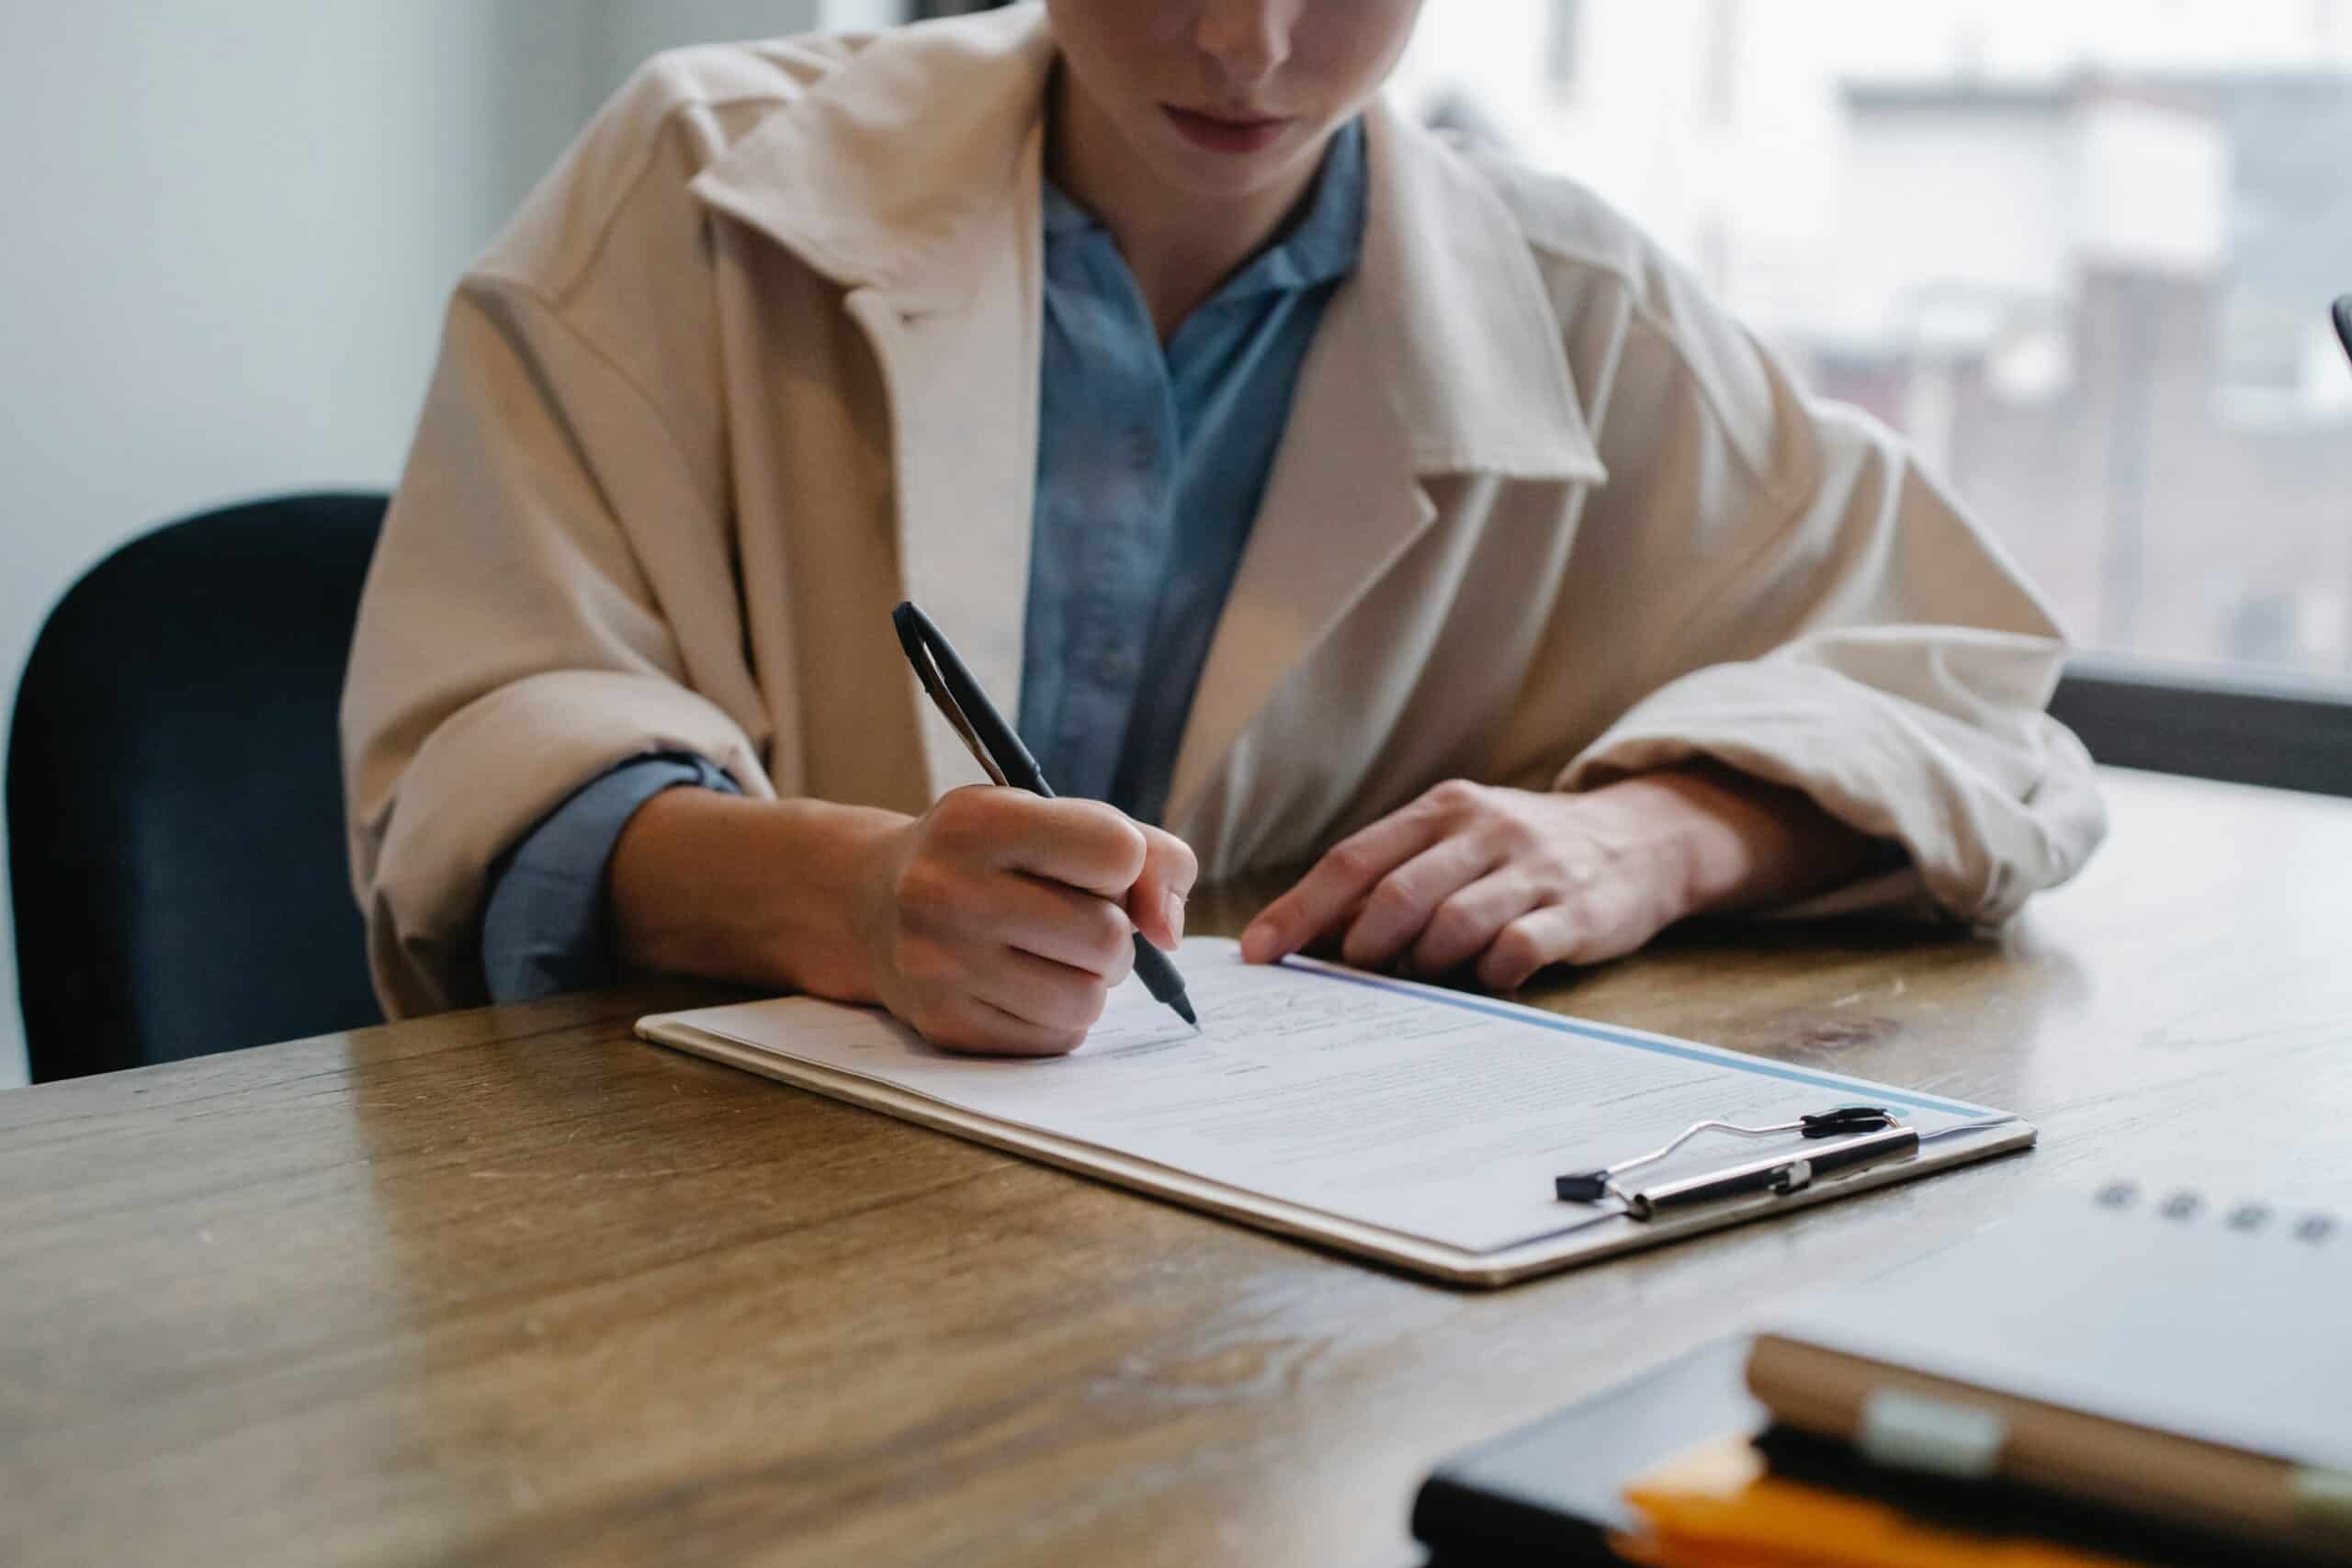 a woman at a job interview writing